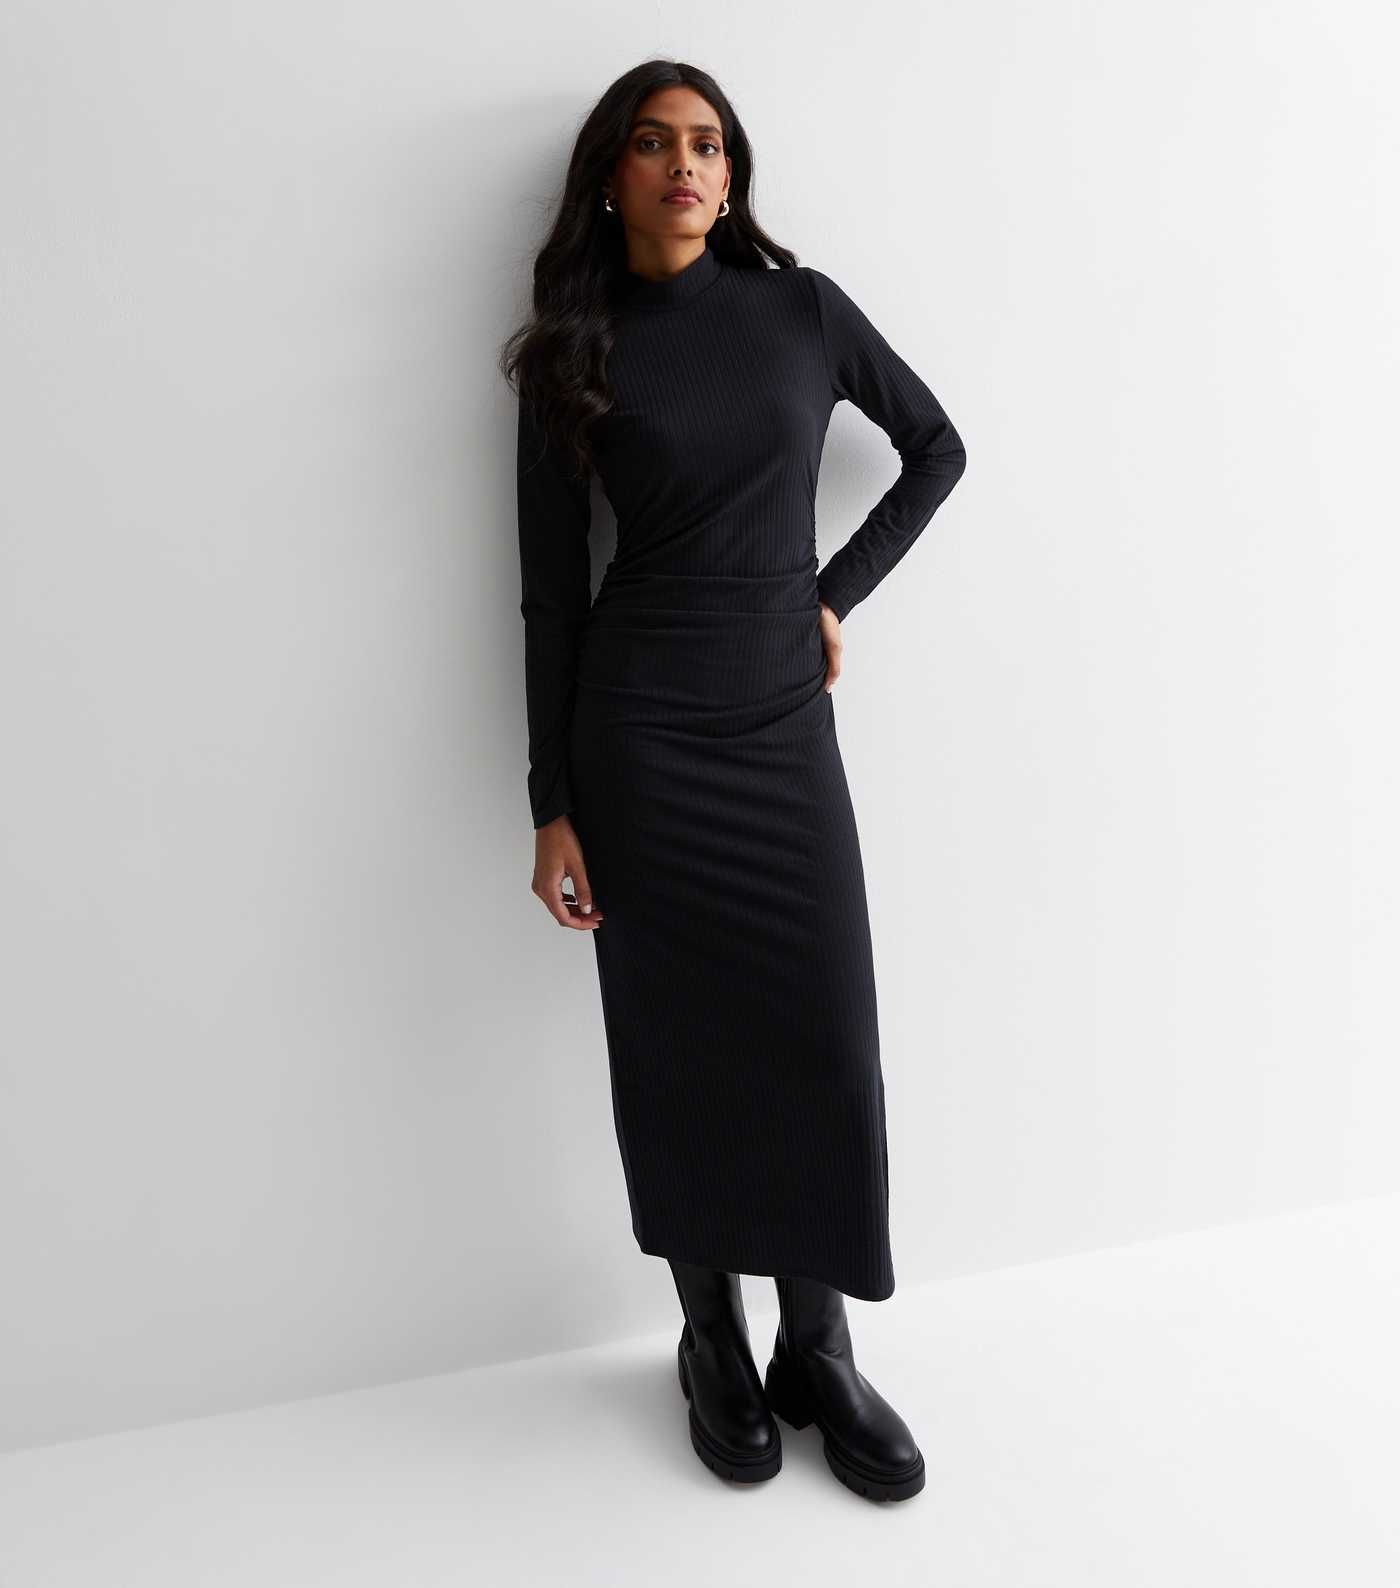 Black Ribbed High Neck Bodycon Midaxi Dress
						
						Add to Saved Items
						Remove from Sav... | New Look (UK)